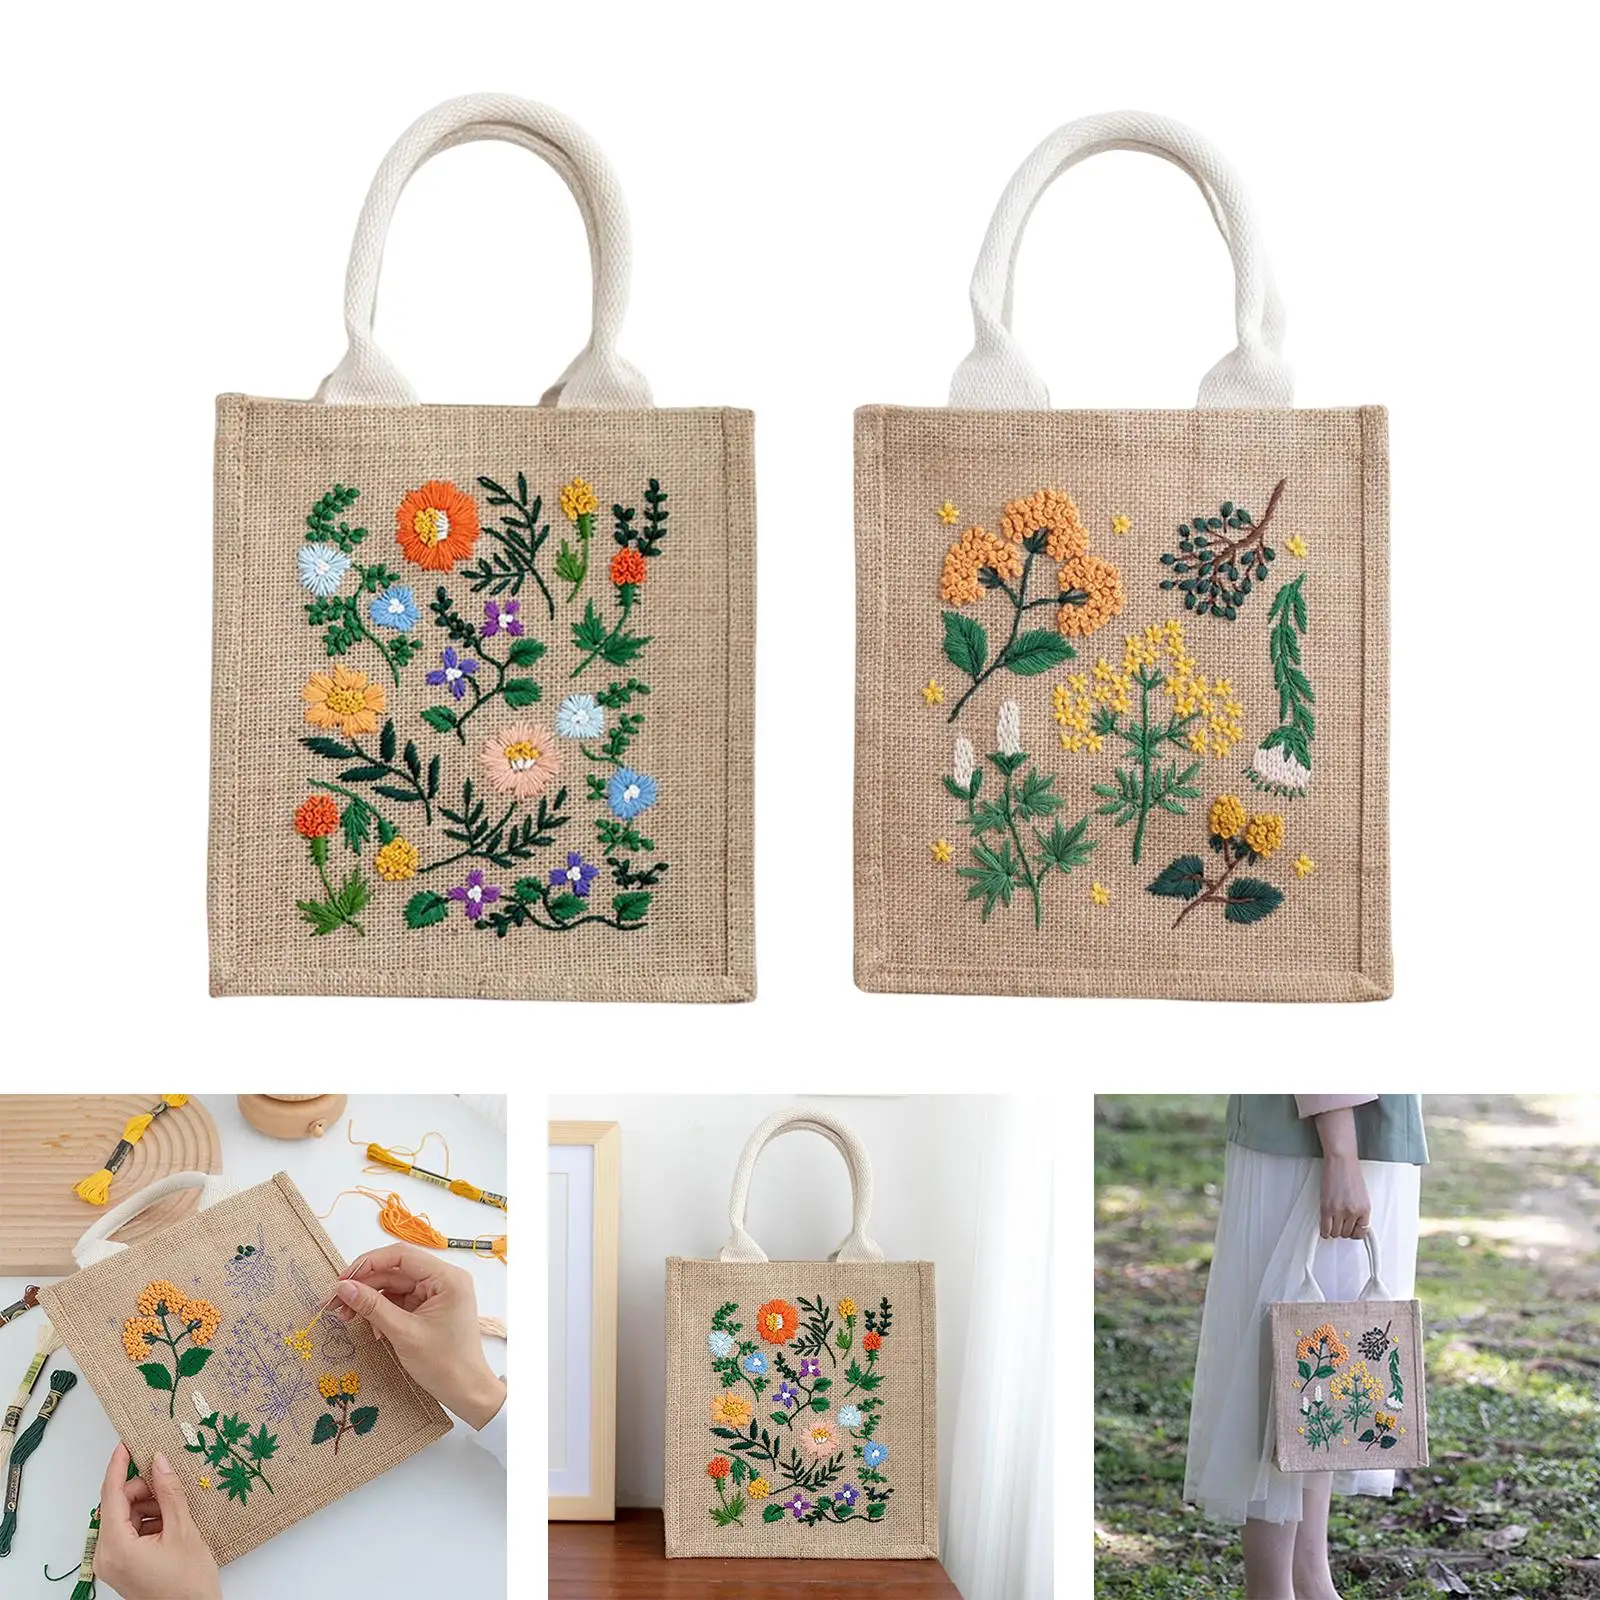 Embroidery Bag with Supplies Girls Gift Cross Stitch Kits Handmade Organizer Bag Handbag Making Crafts Embroidery Kit for Adults